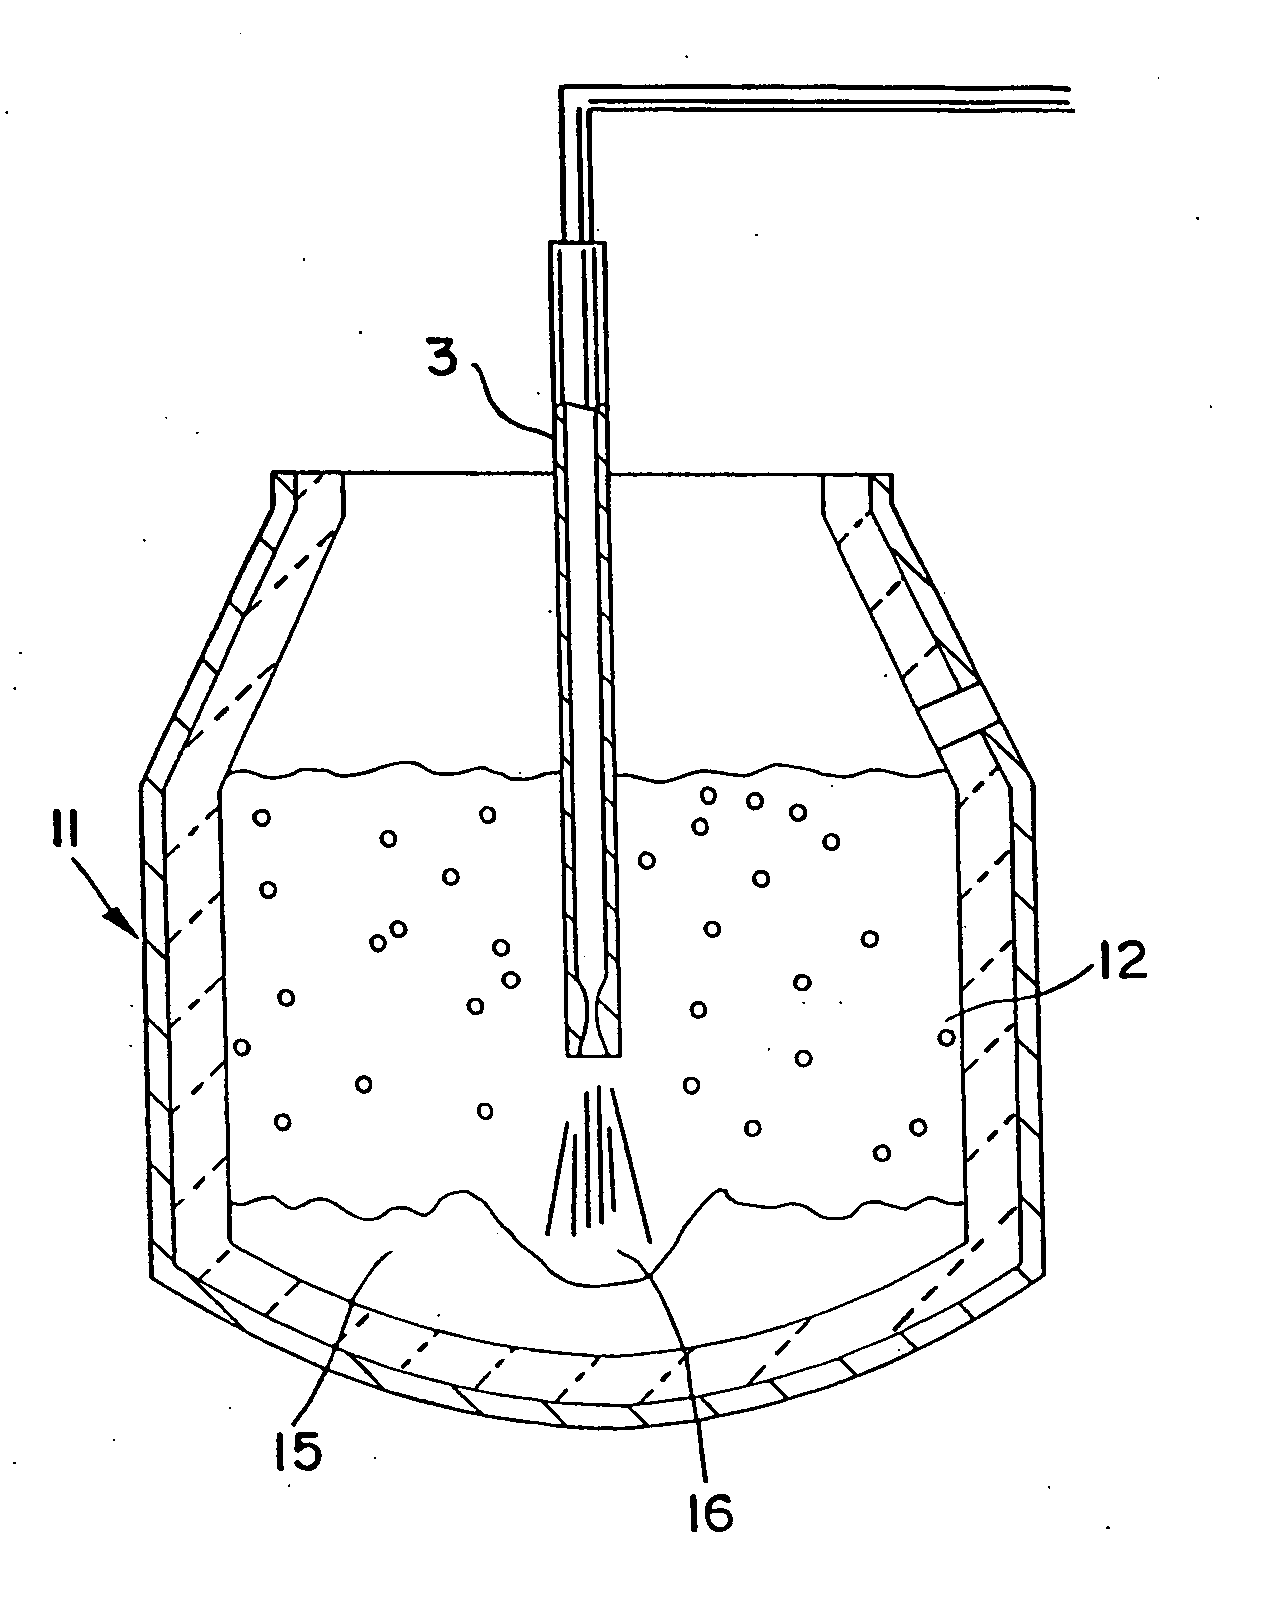 Method for producing low carbon steel